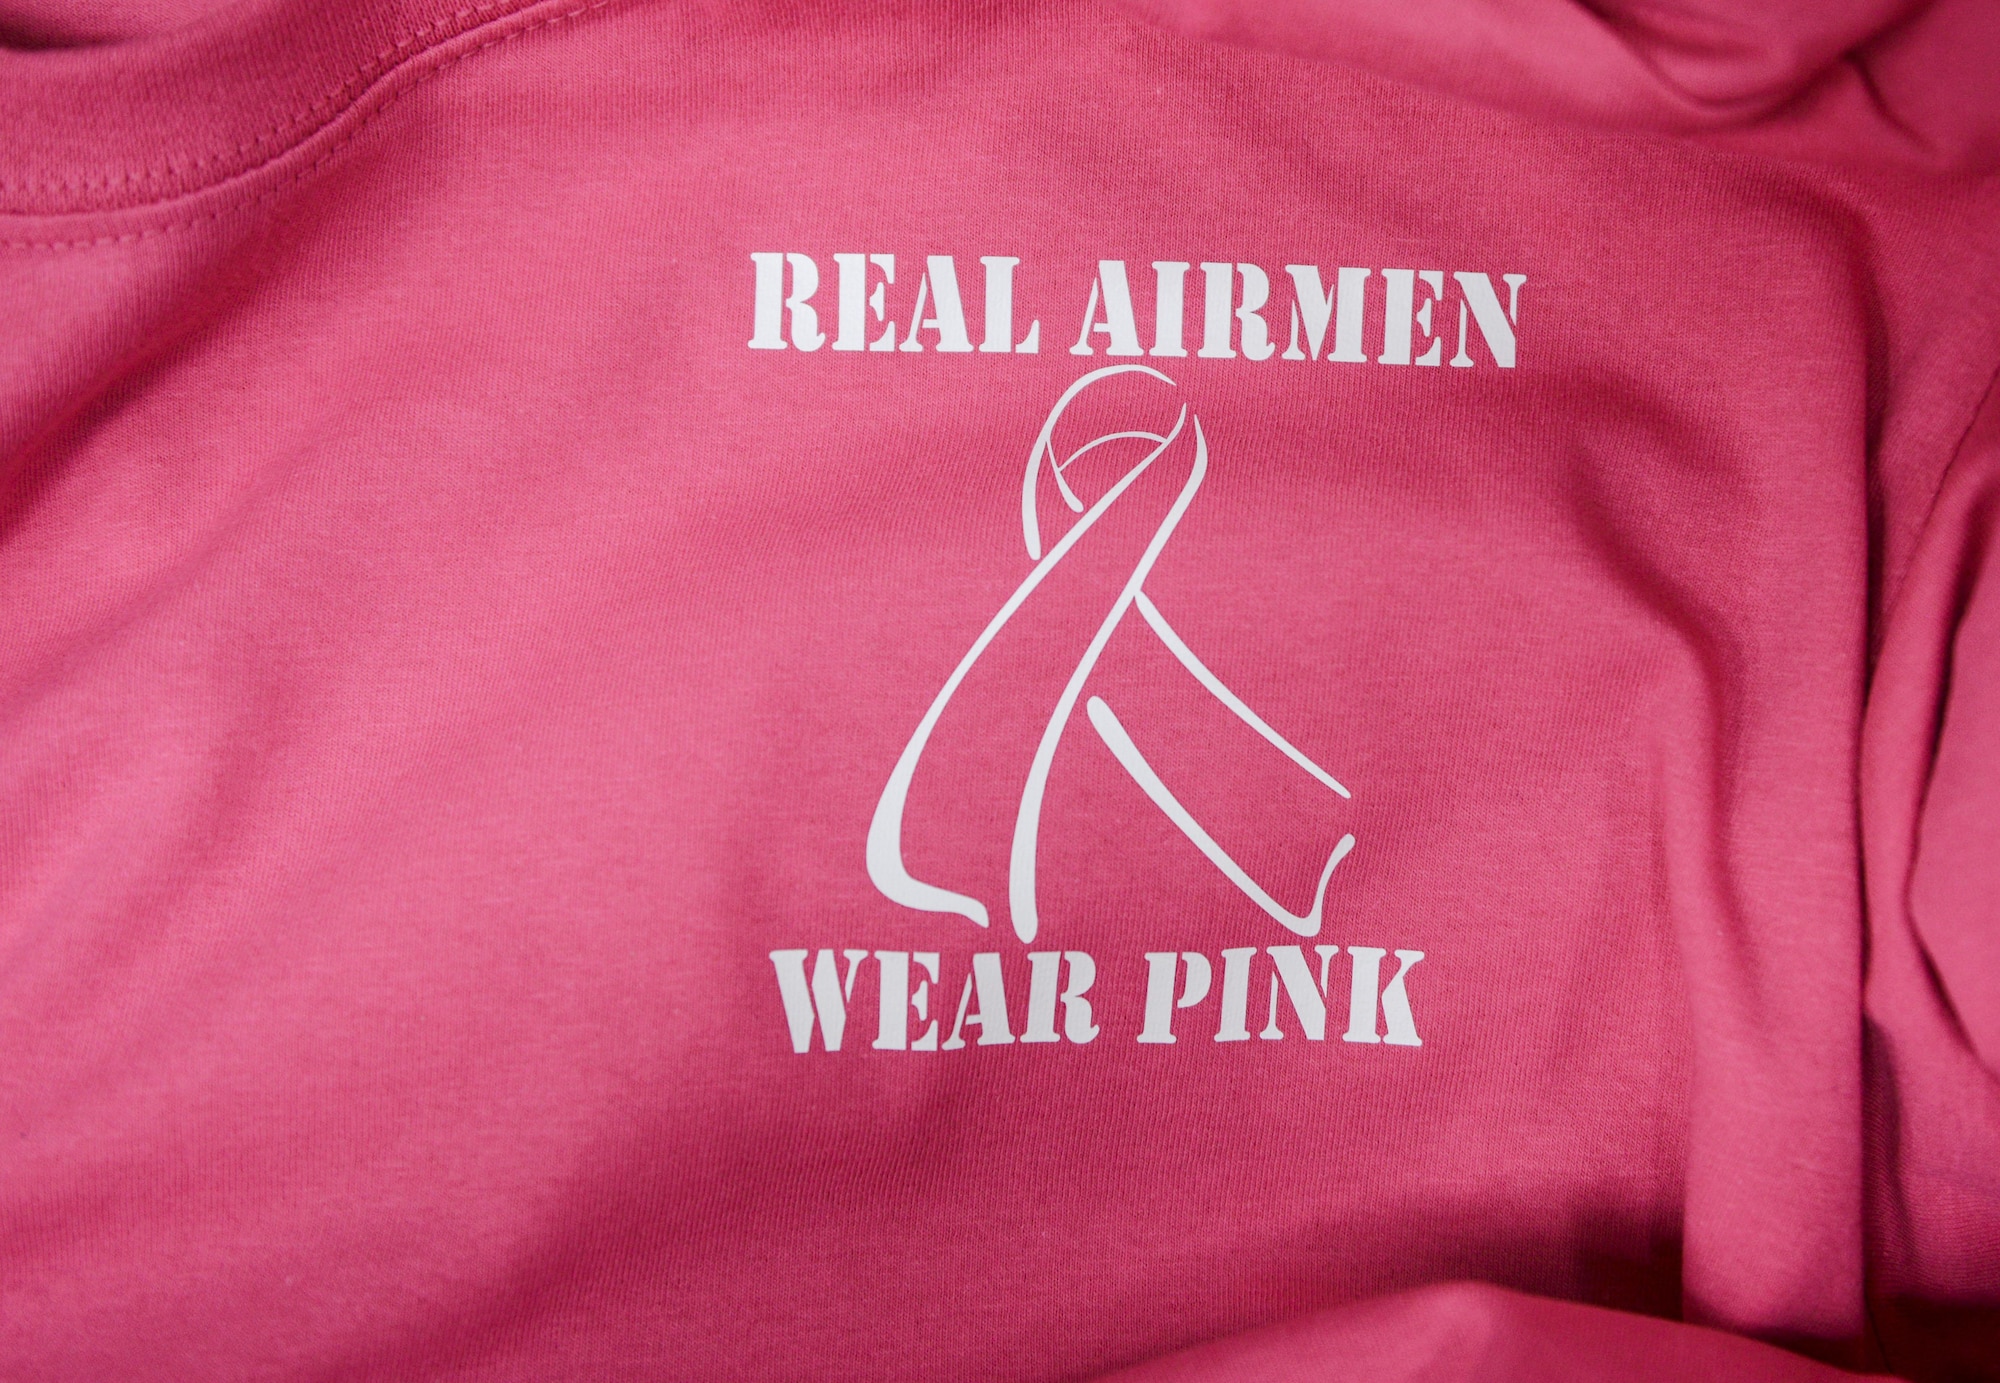 A pink morale shirt of the 86th Medical Group is displayed in a box at Ramstein Air Base, Germany, Oct. 6, 2016. The 86th MDG is using the color pink for its morale shirts in observance of Breast Cancer Awareness Month. (U.S. Air Force photo by Airman 1st Class Joshua Magbanua)